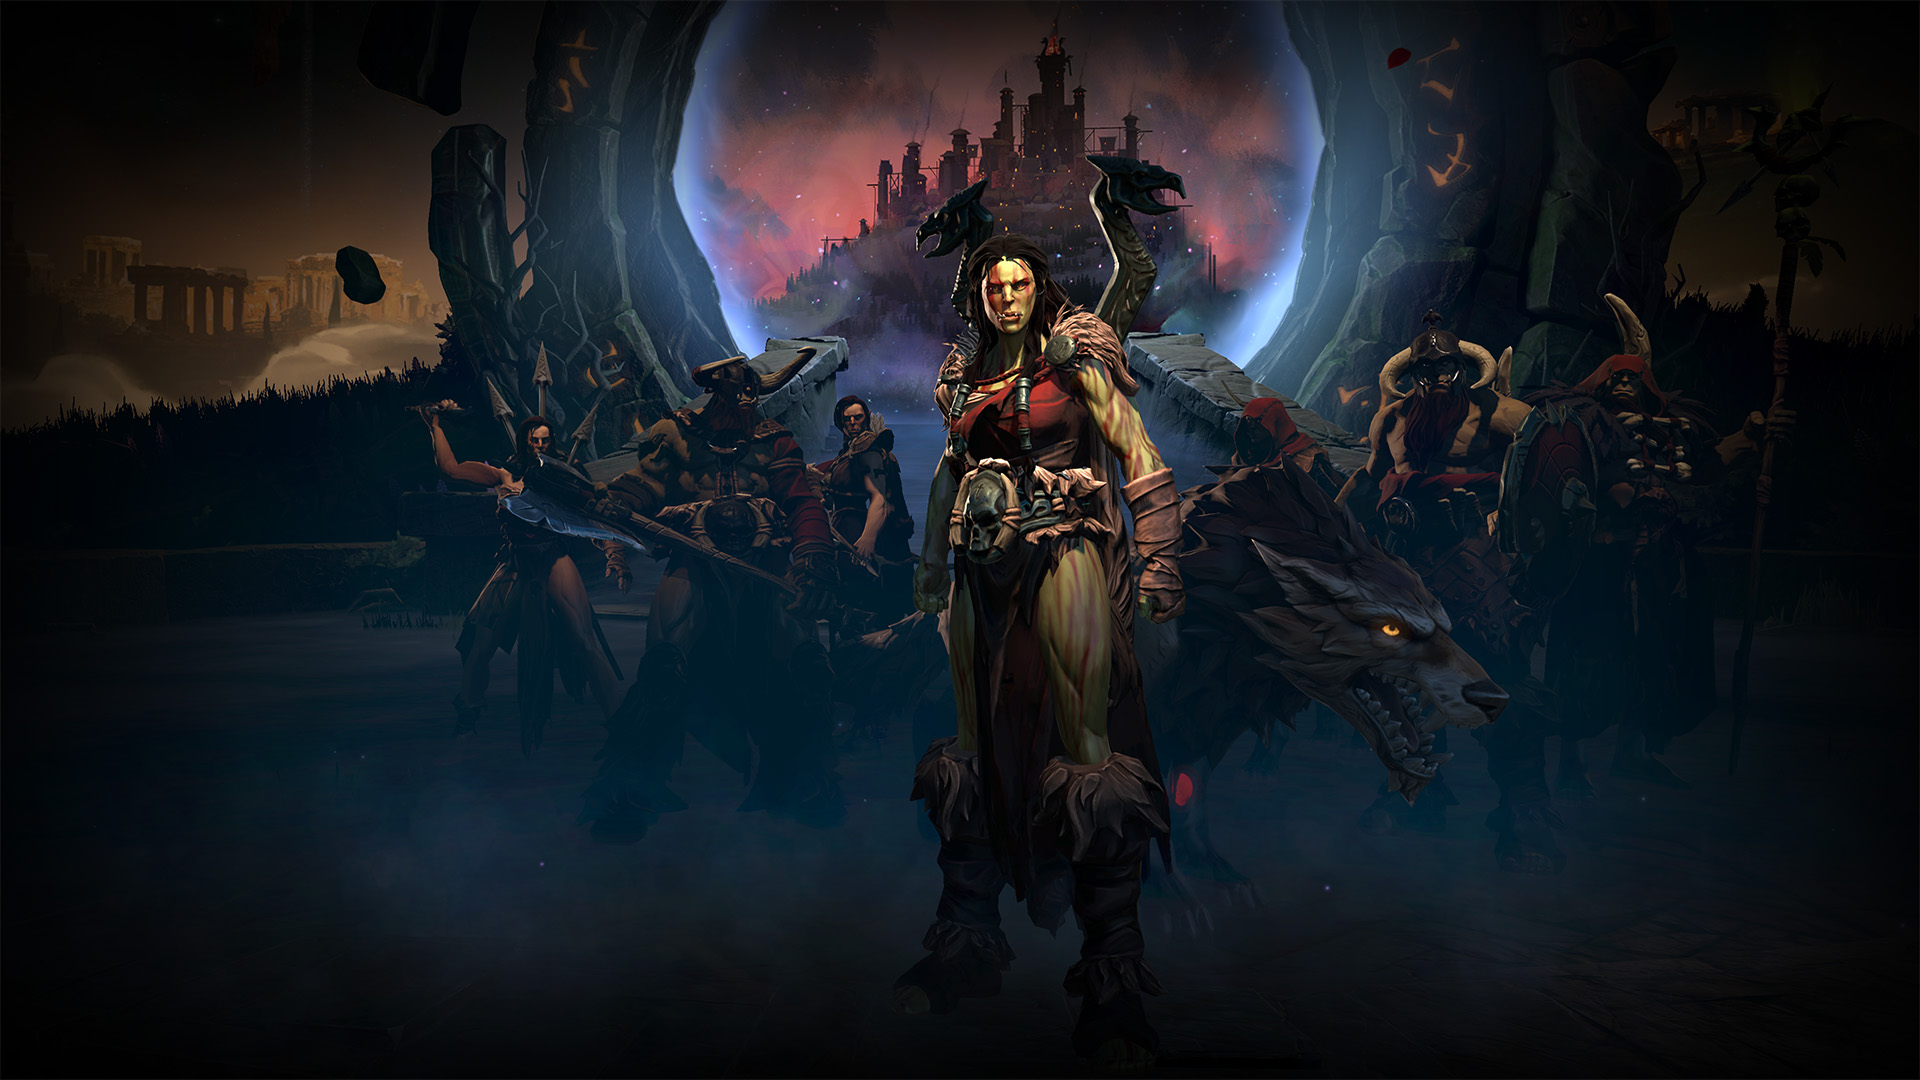 Diablo 4 bags multiple perfect review scores—here's what critics are saying about Blizzard's 'return to darkness'